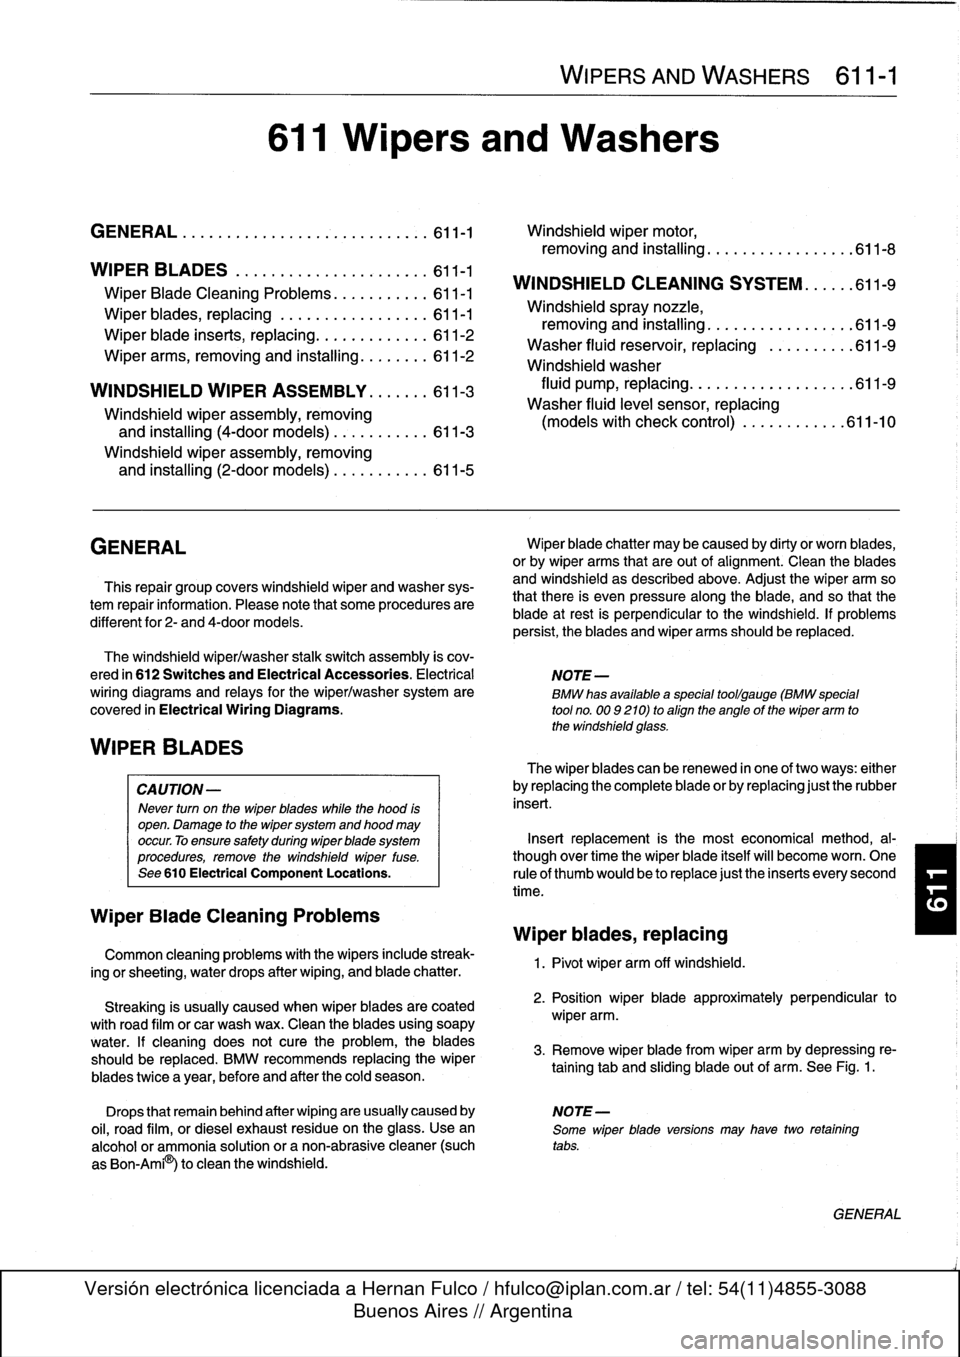 BMW M3 1995 E36 Workshop Manual 
611
Wipers
and
Washers

GENERAL
..
.
.
.
.
.
.
.
.
.
.
.
.
.
.....
.
......
.
611-1

	

Windshield
wiper
motor,

removing
and
installing
.
...............
.611-8

WIPER
BLADES
.
.
.
.....
.
.
.
.
.
.